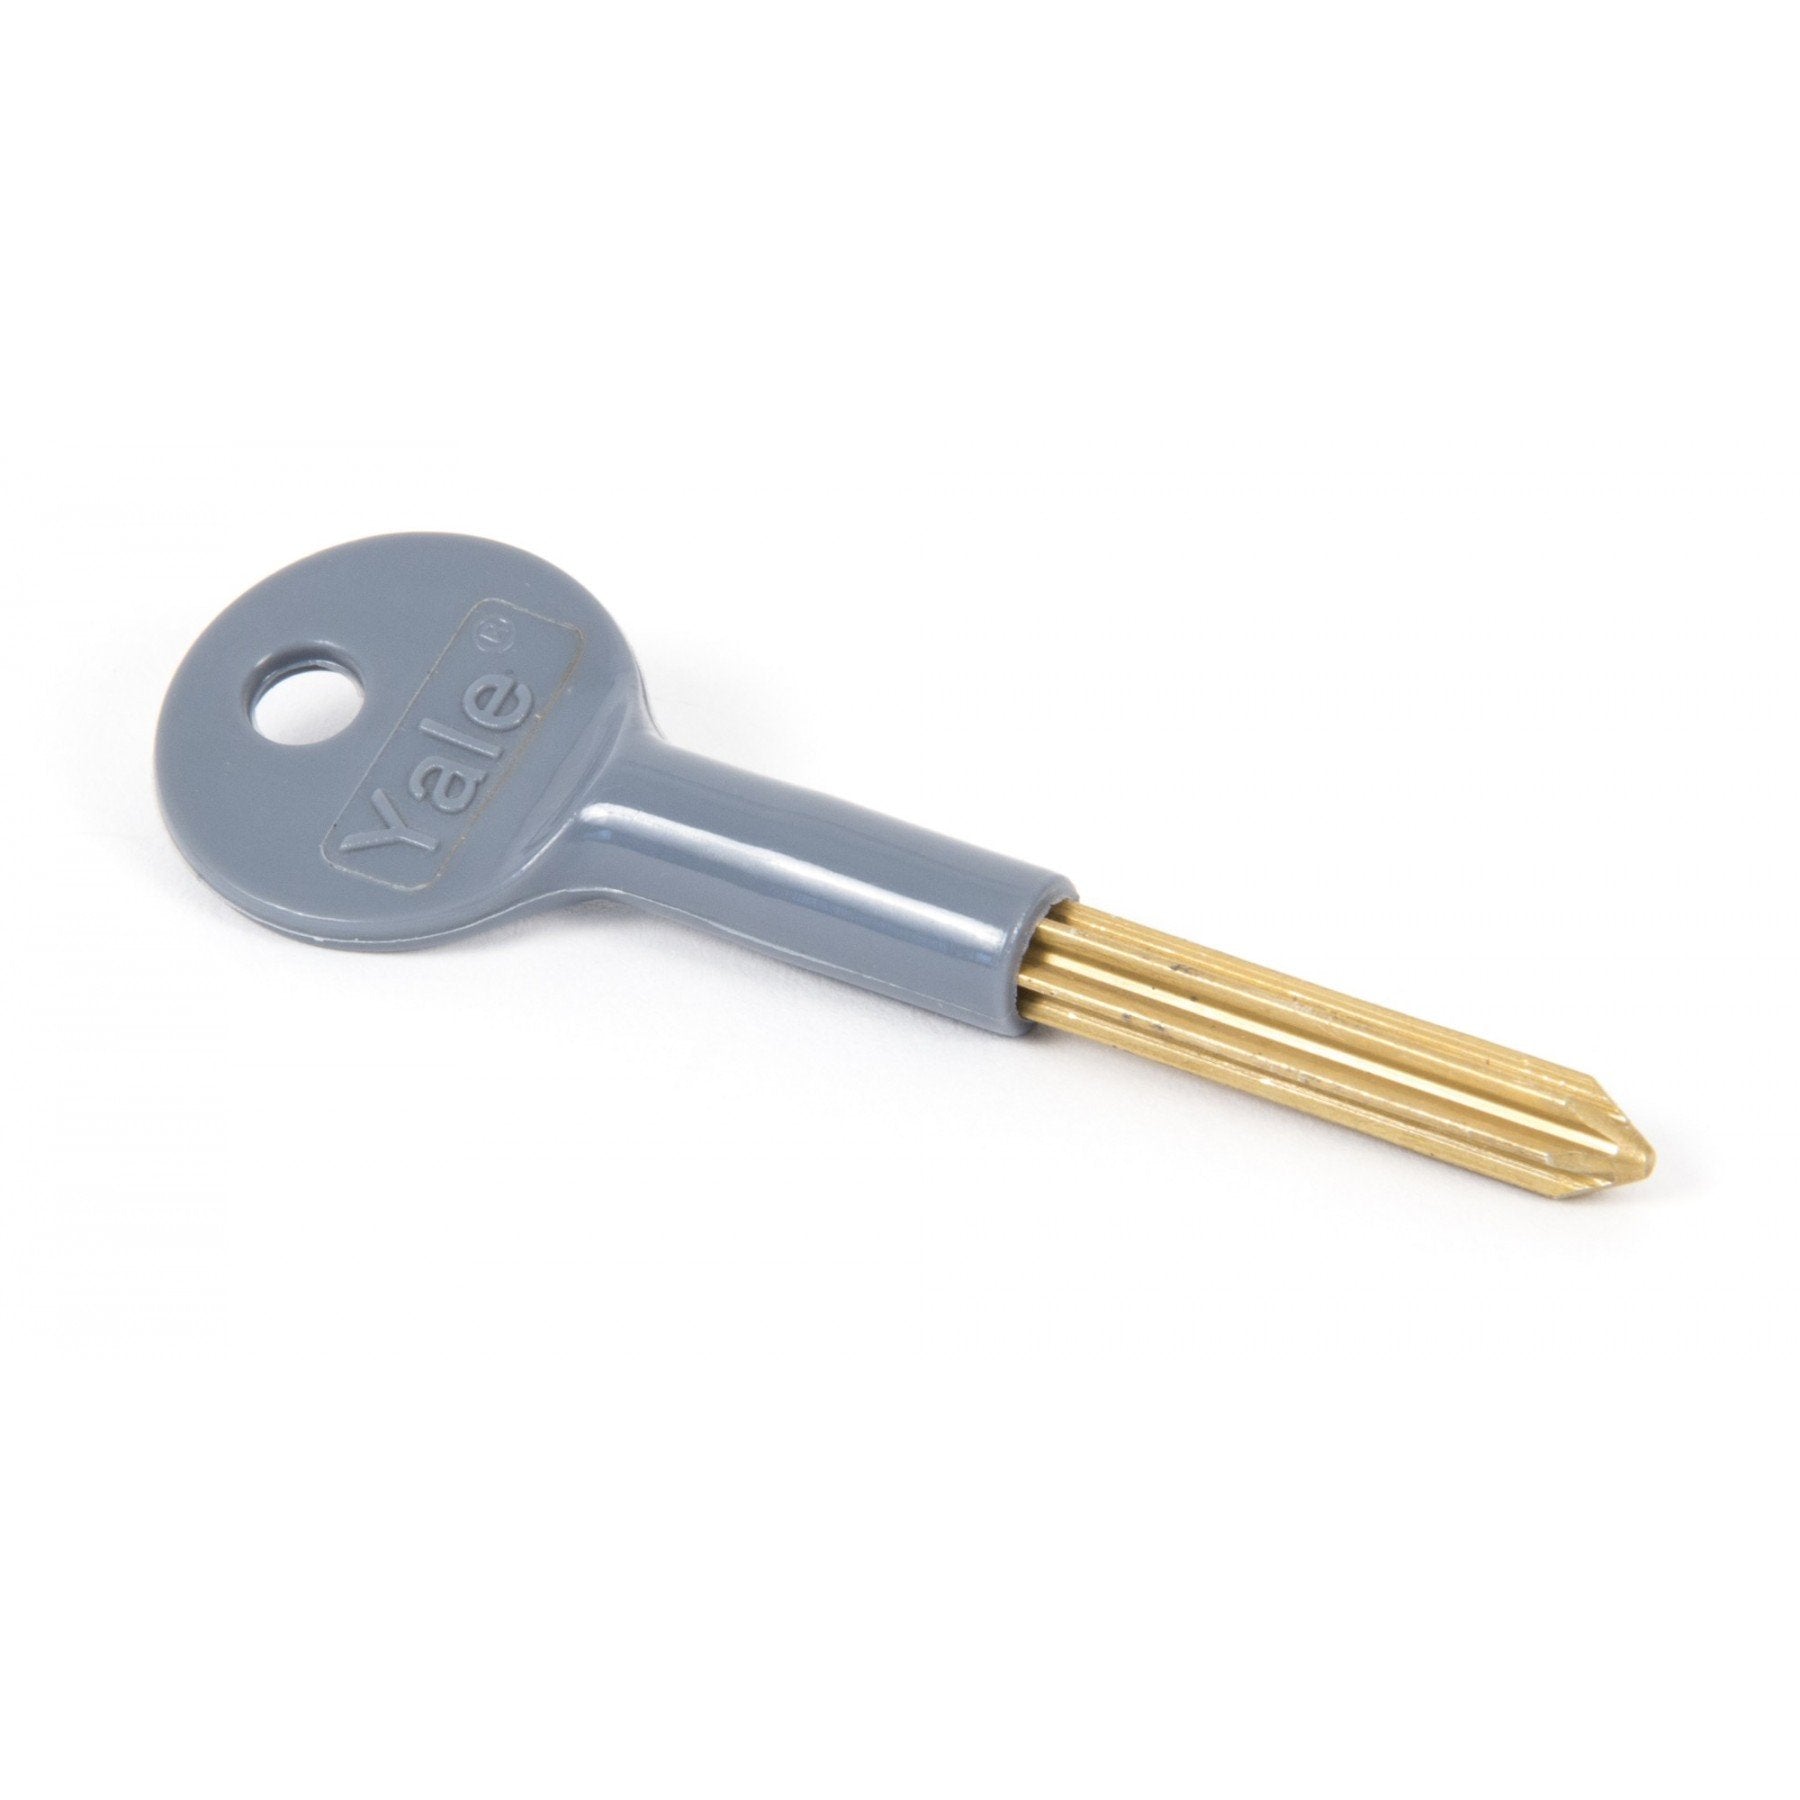 From the Anvil Chubb Short Security Star Key - No.42 Interiors